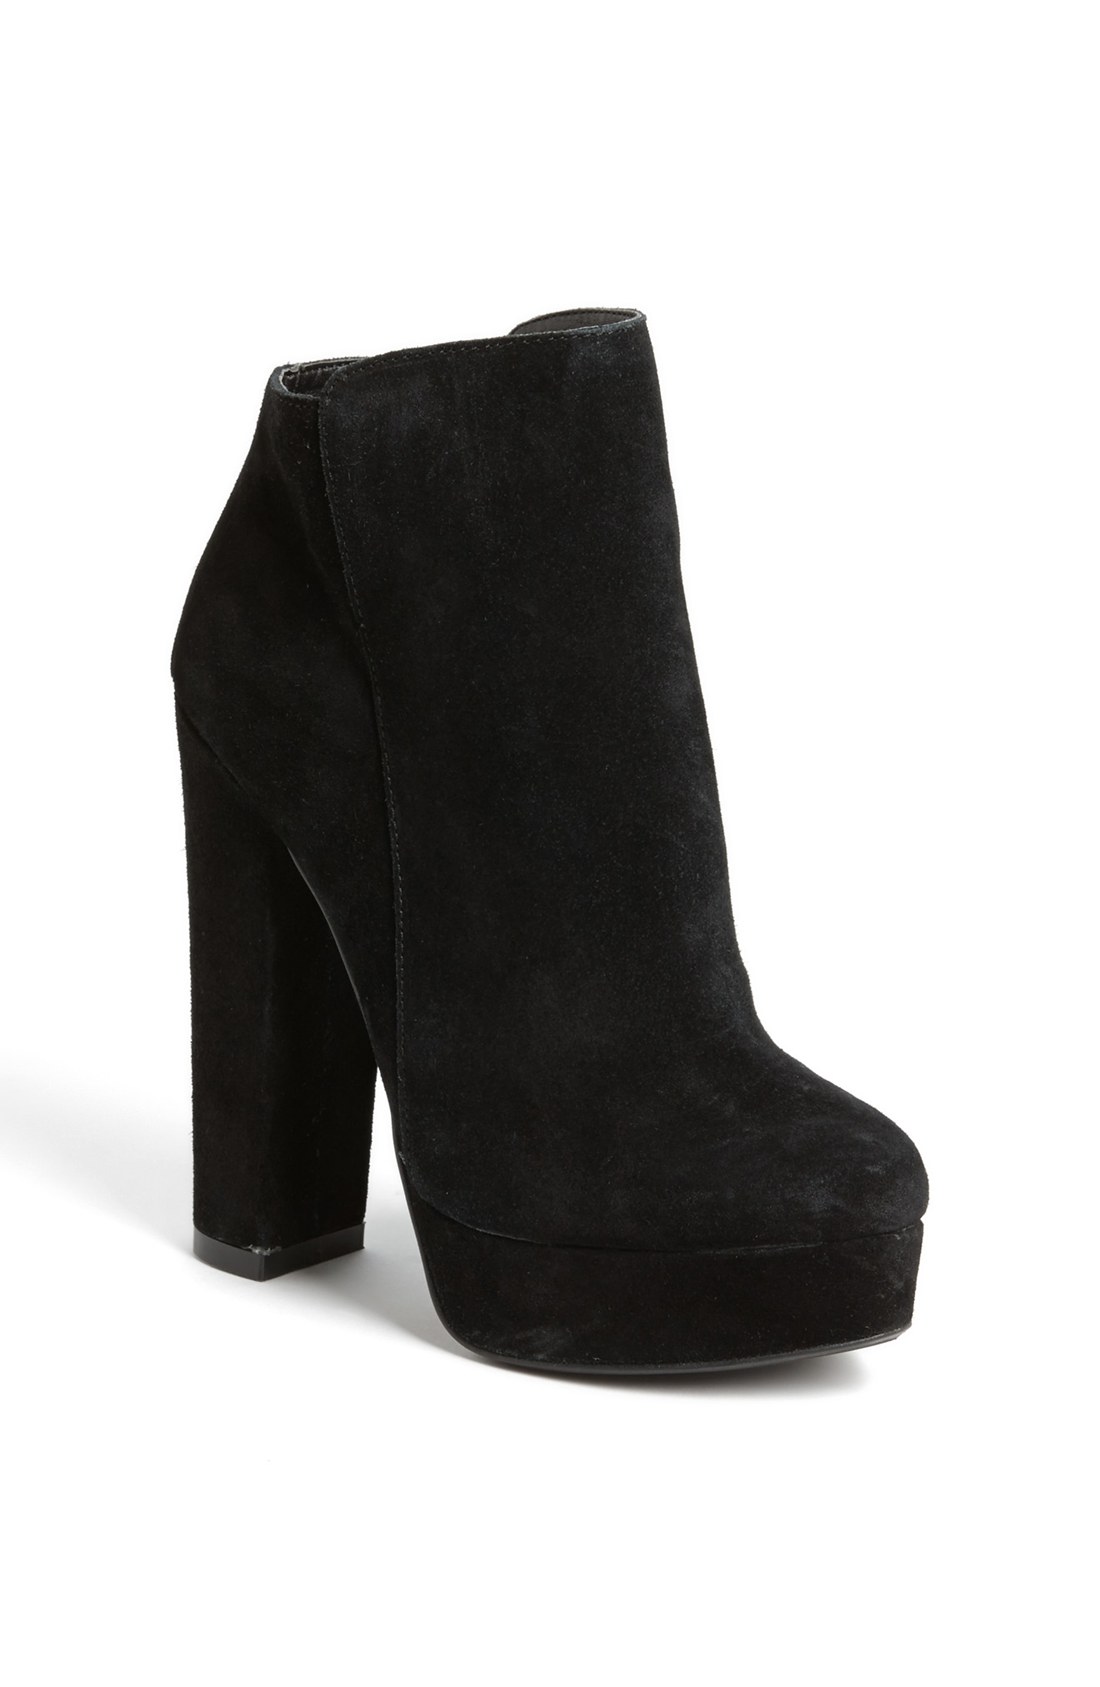 Chinese Laundry Elise Laughter Bootie in Black | Lyst